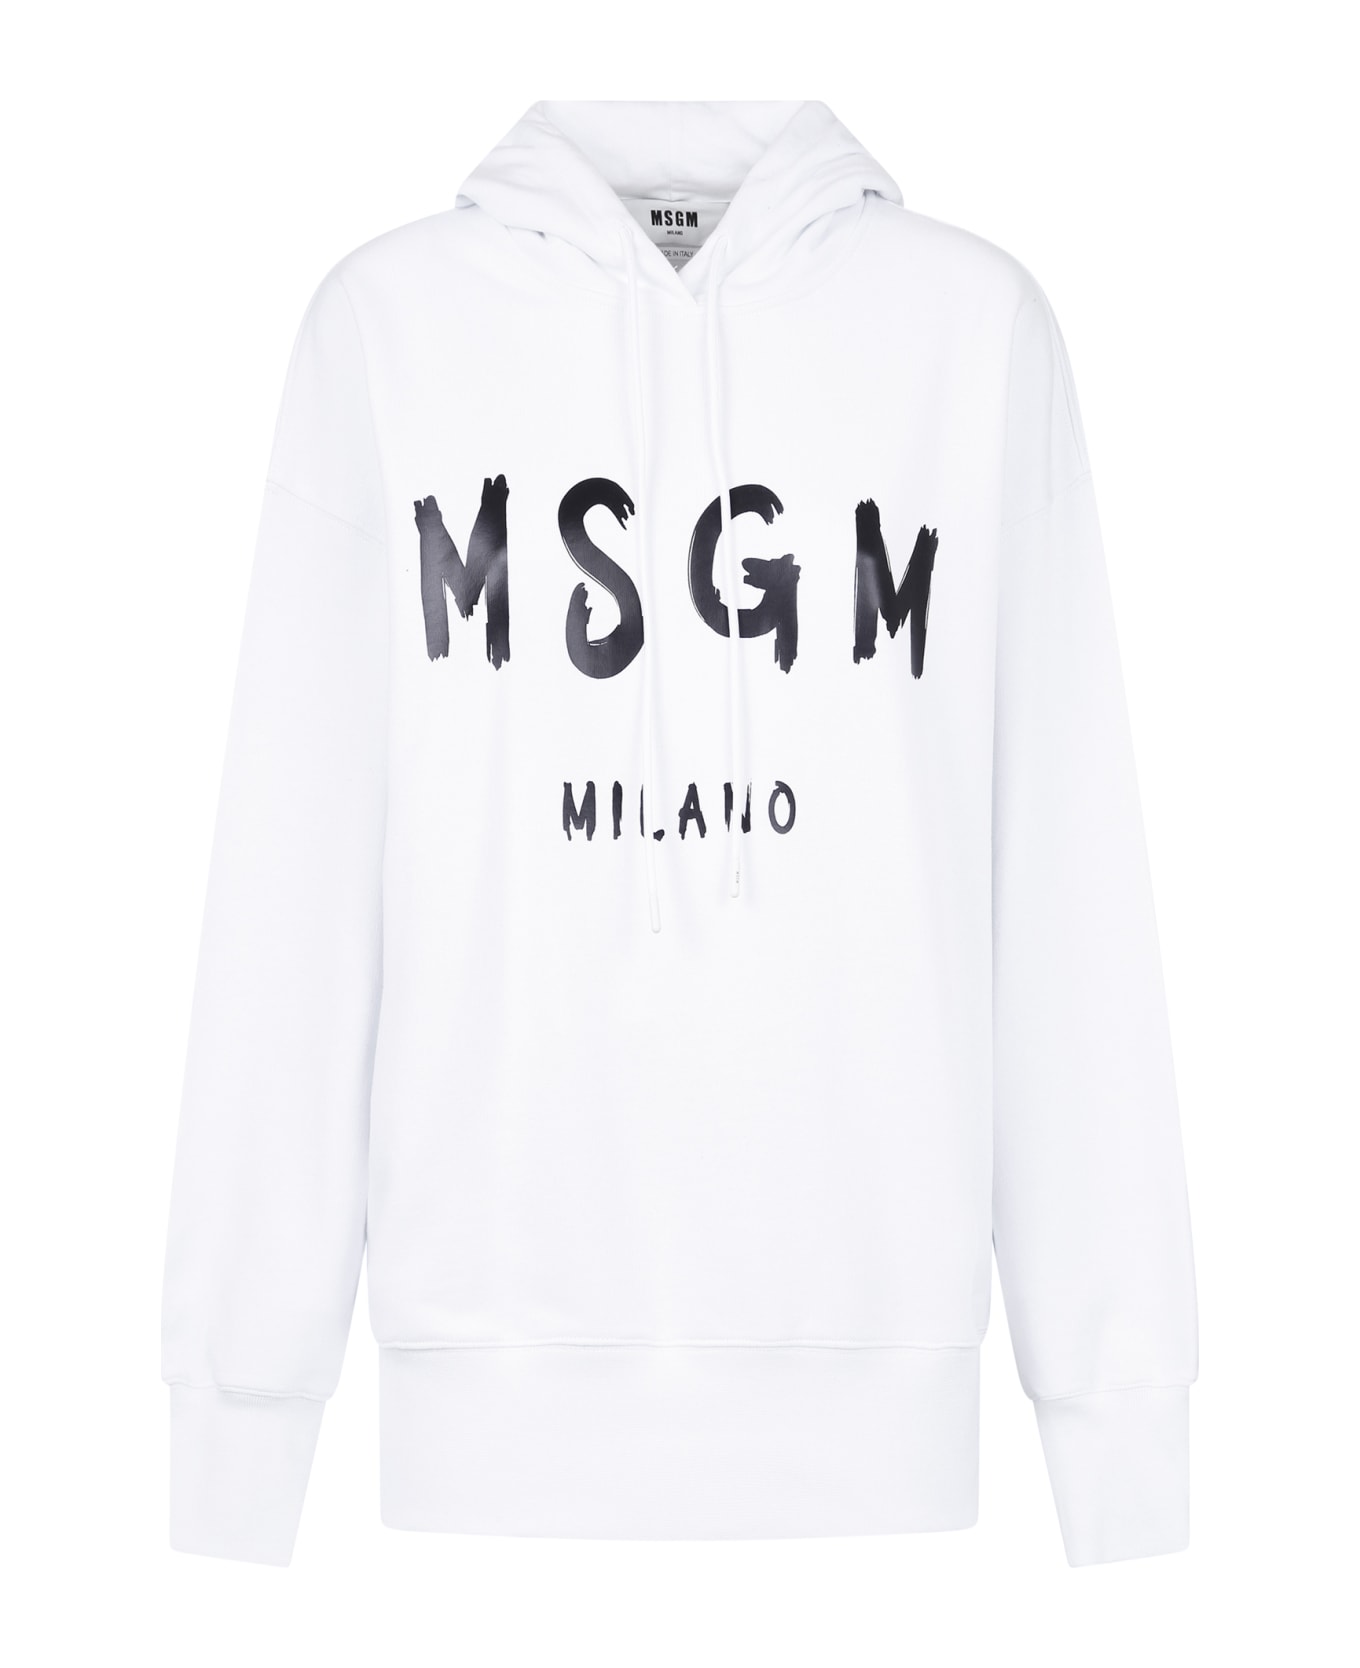 MSGM Relaxed Fit Sweatshirt - White